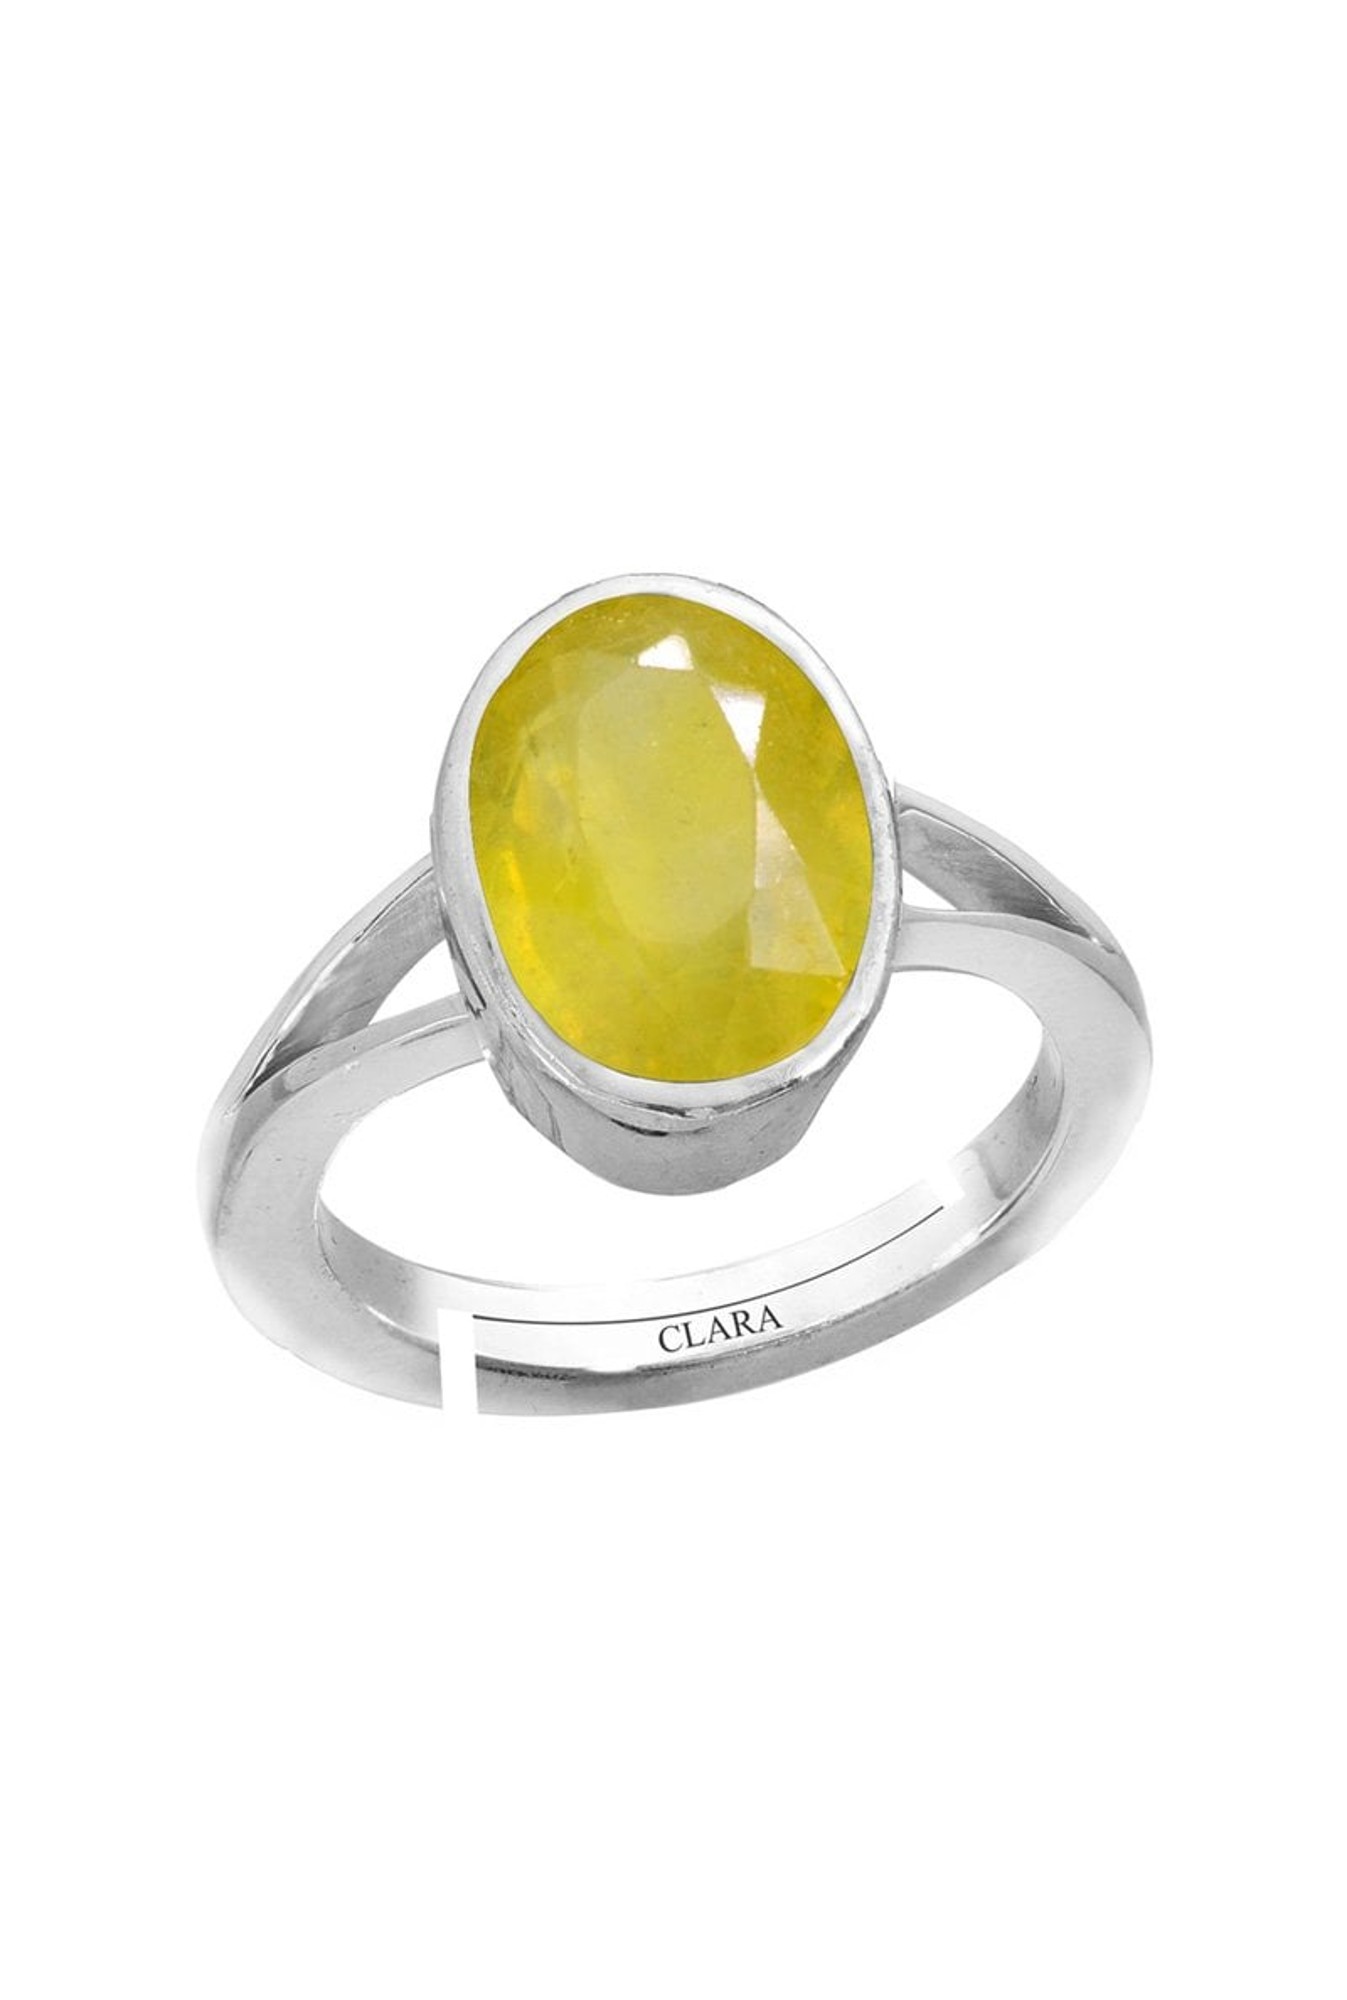 Natural Yellowsapphire/pukhraj Gemstone Astrologcal Ring 925 Strling Silver  Handemade Ring for Unisex - Etsy